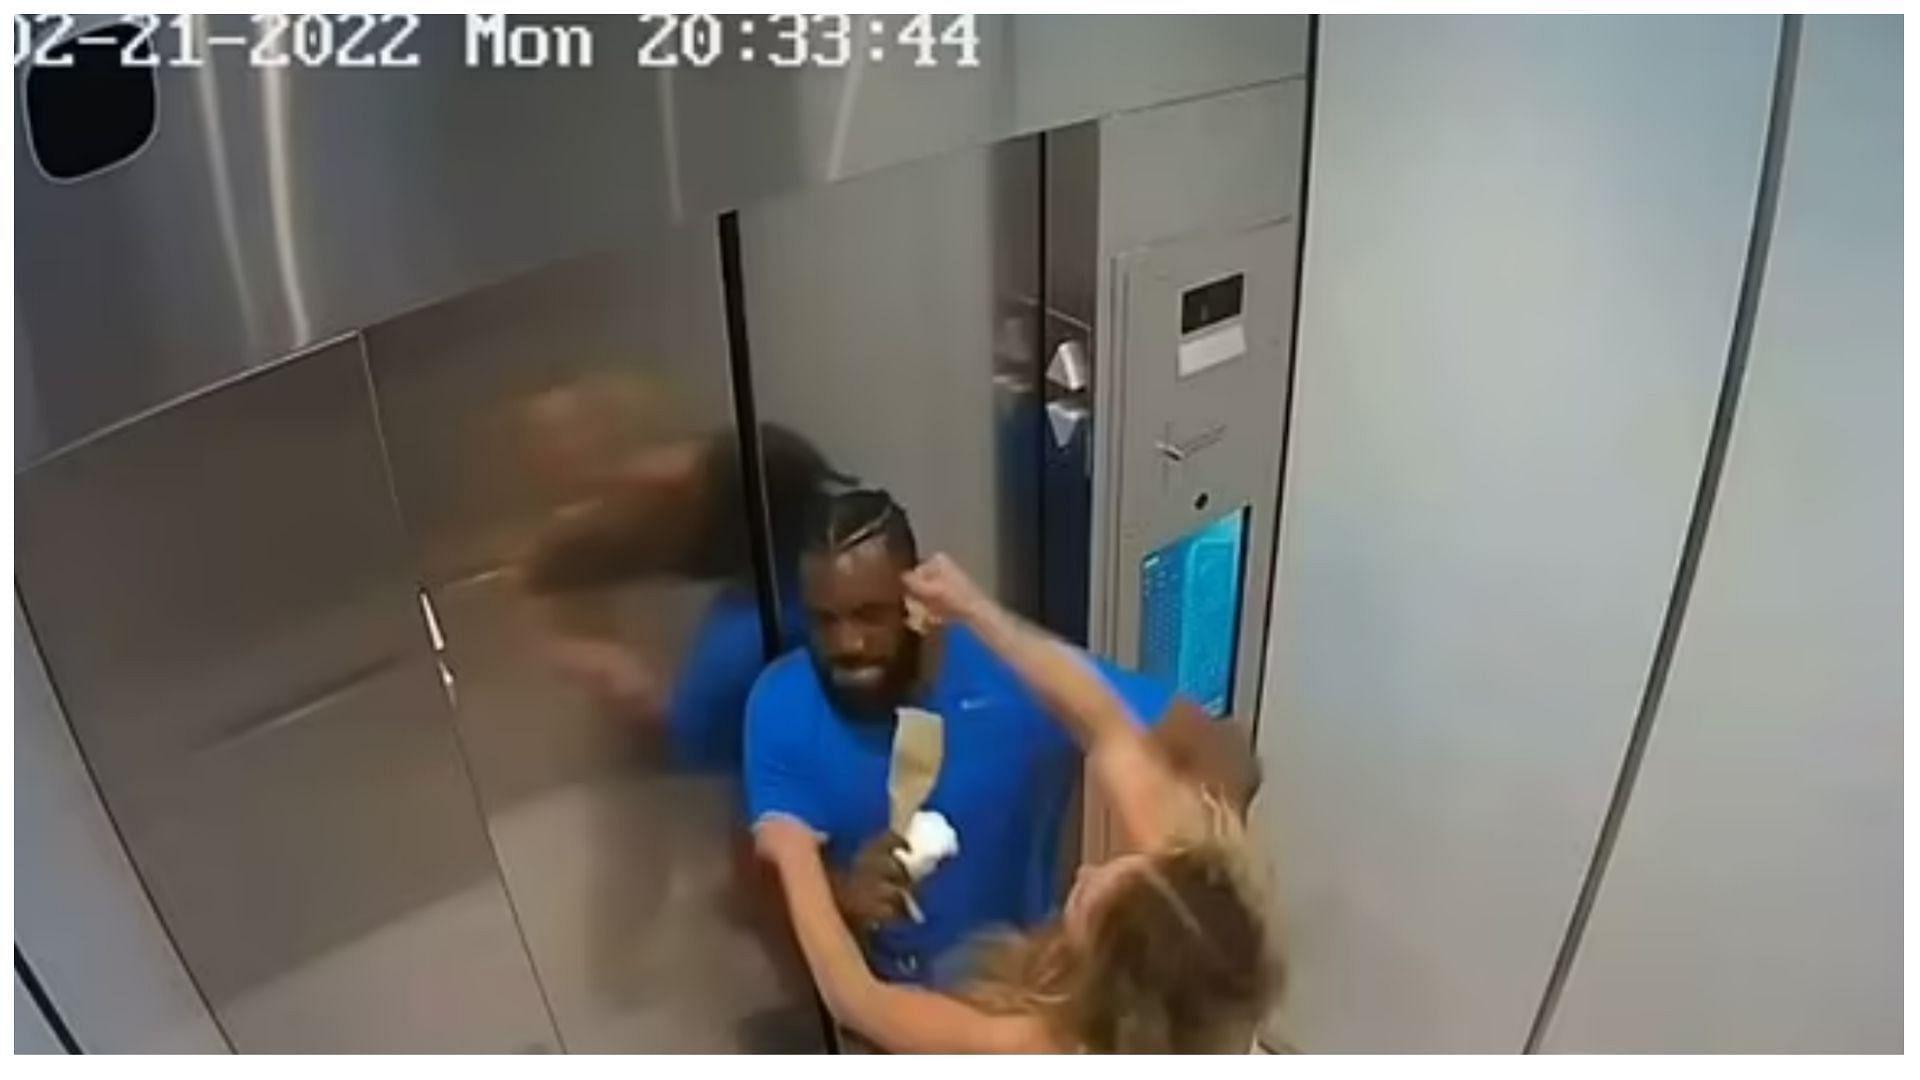 Security footage taken from the building&#039;s elevator two months before the murder also showed Clenney attacking her boyfriend (Image via Miami Dade State Attorney office)